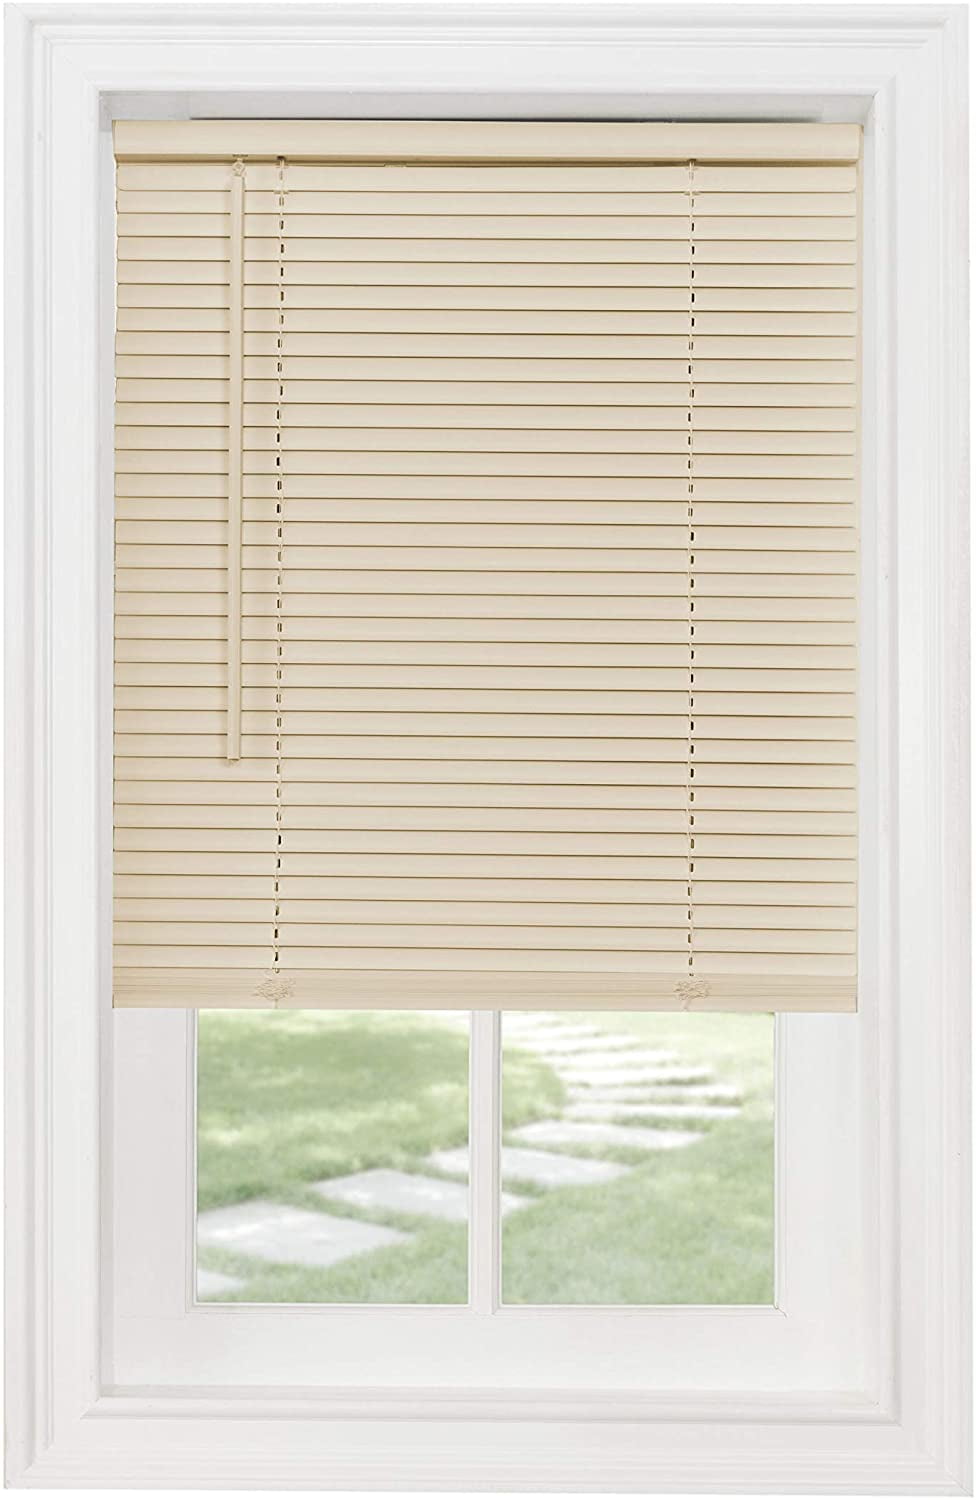 Details about   1 in Vinyl Mini Blind Cordless Window Blinds Shade Washable White/Alabaster 